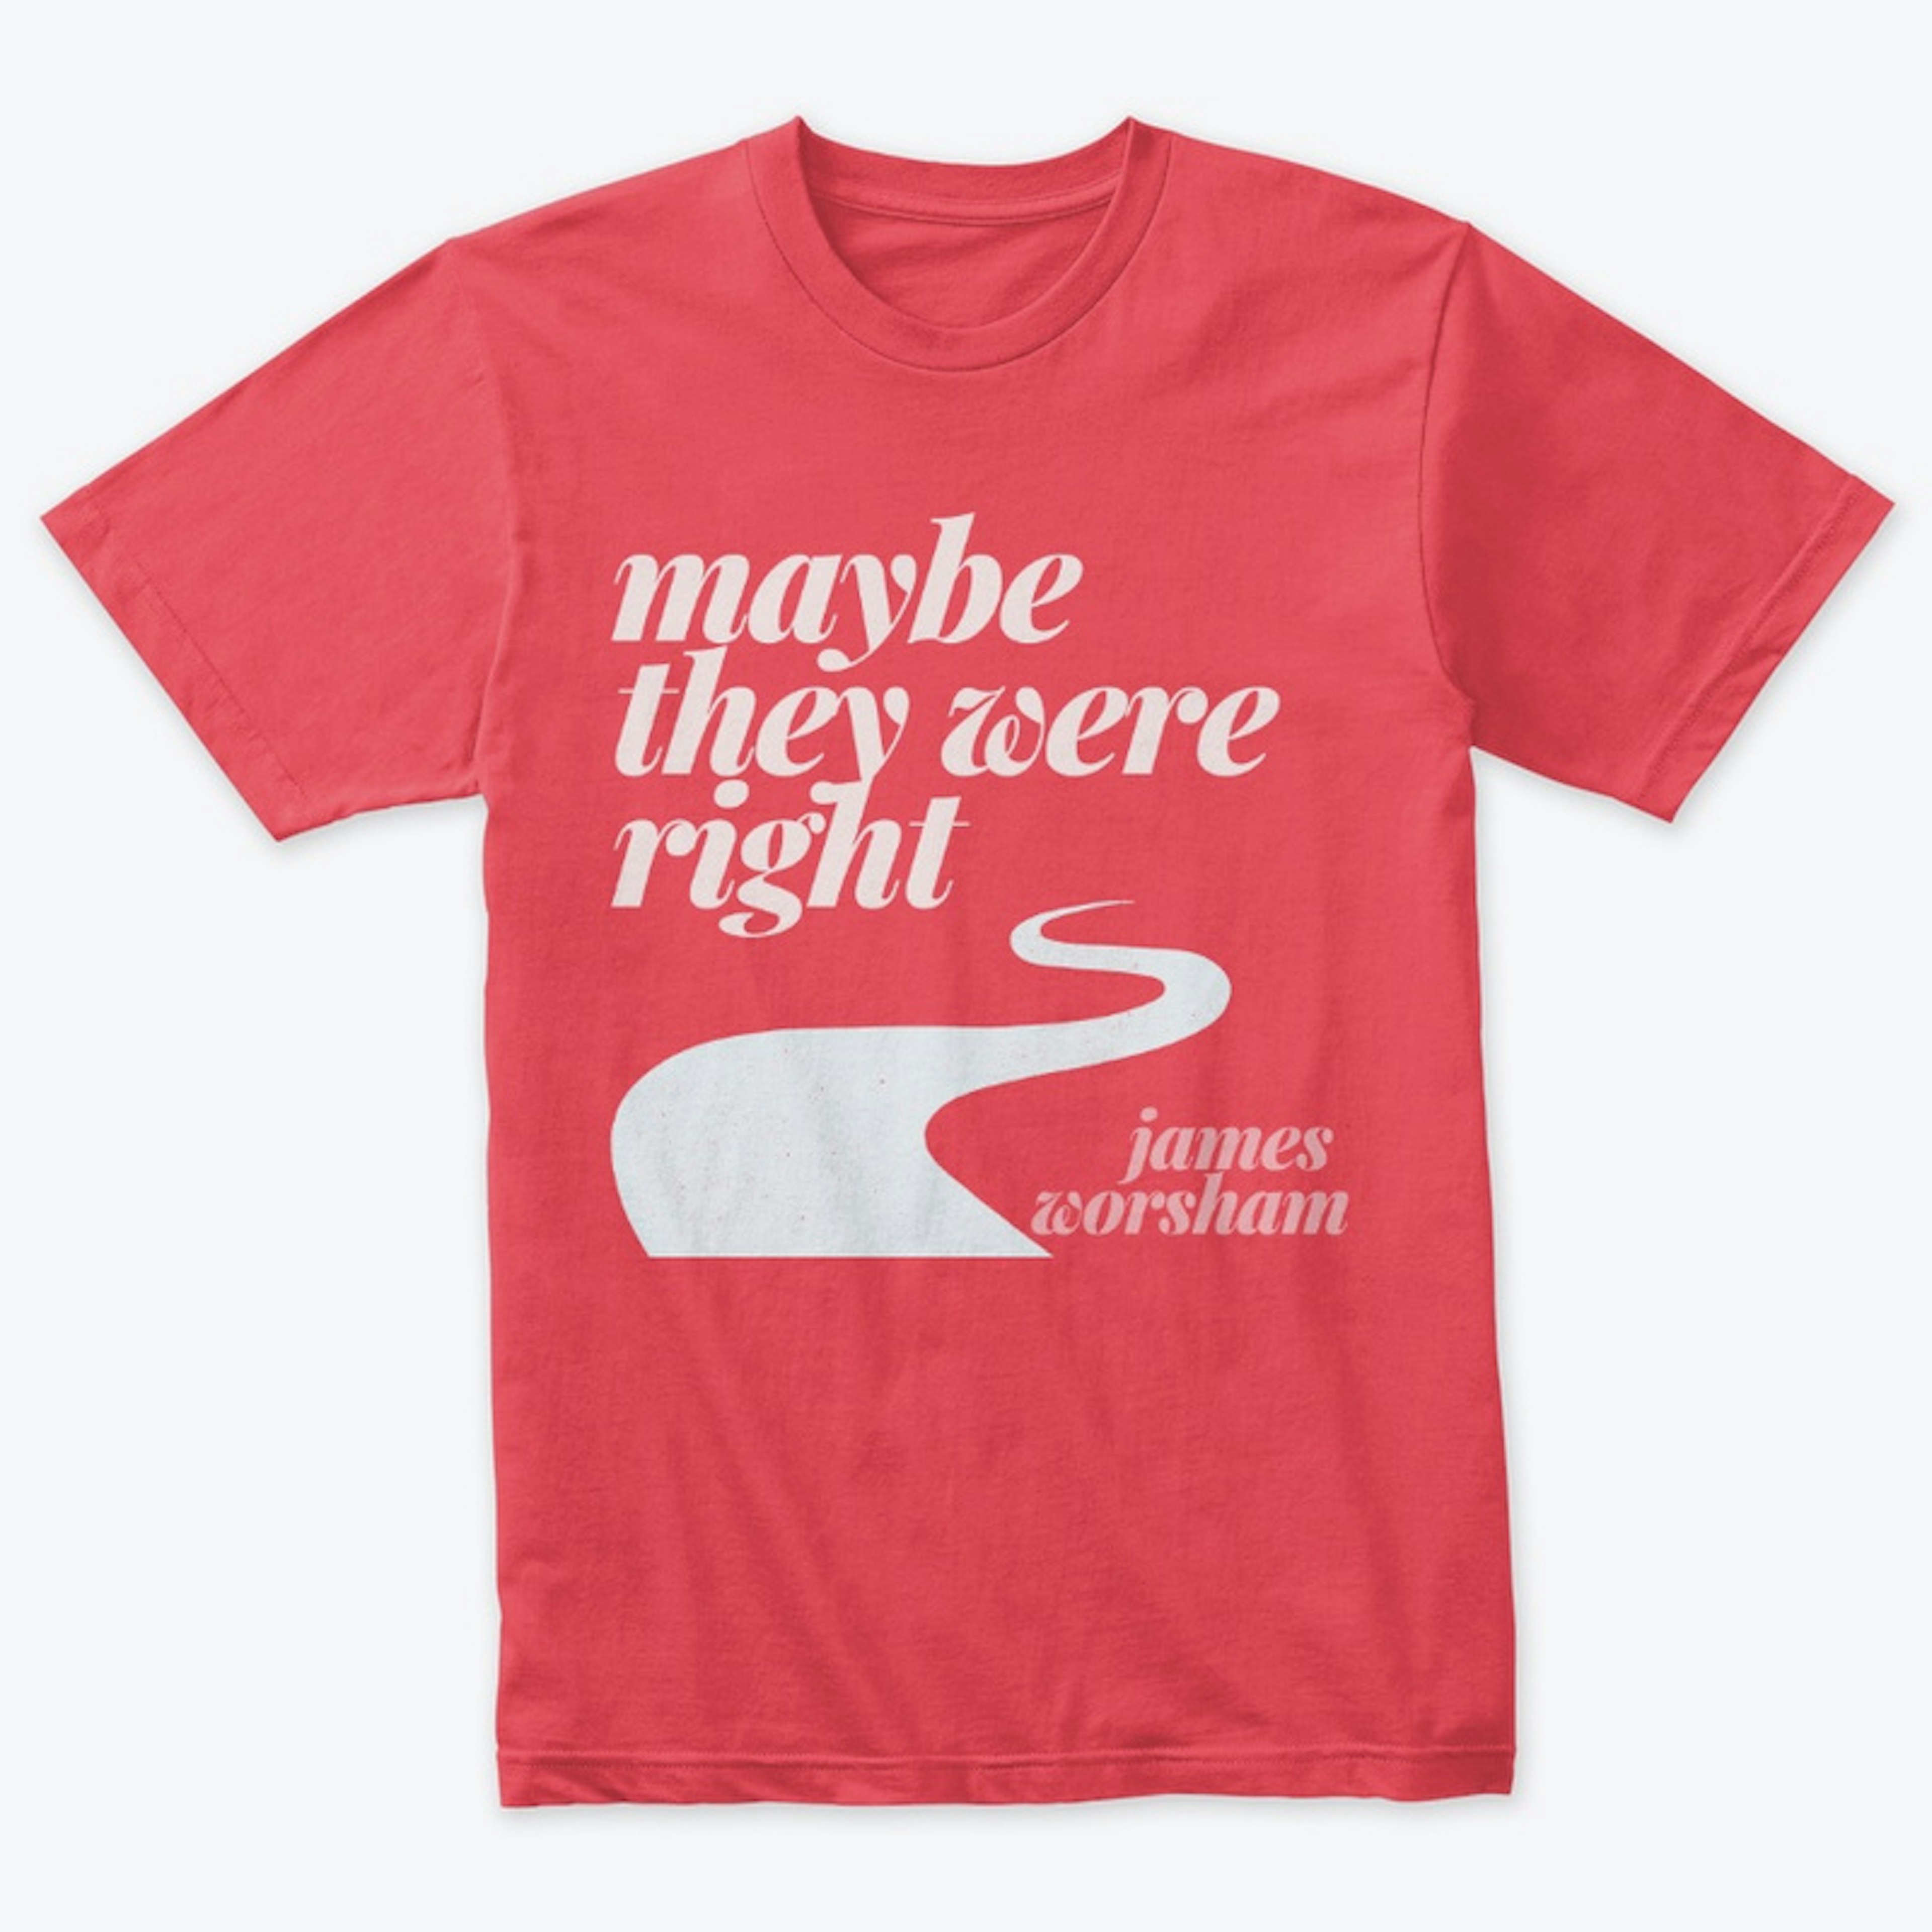 "Maybe They Were Right" - Premium Tee